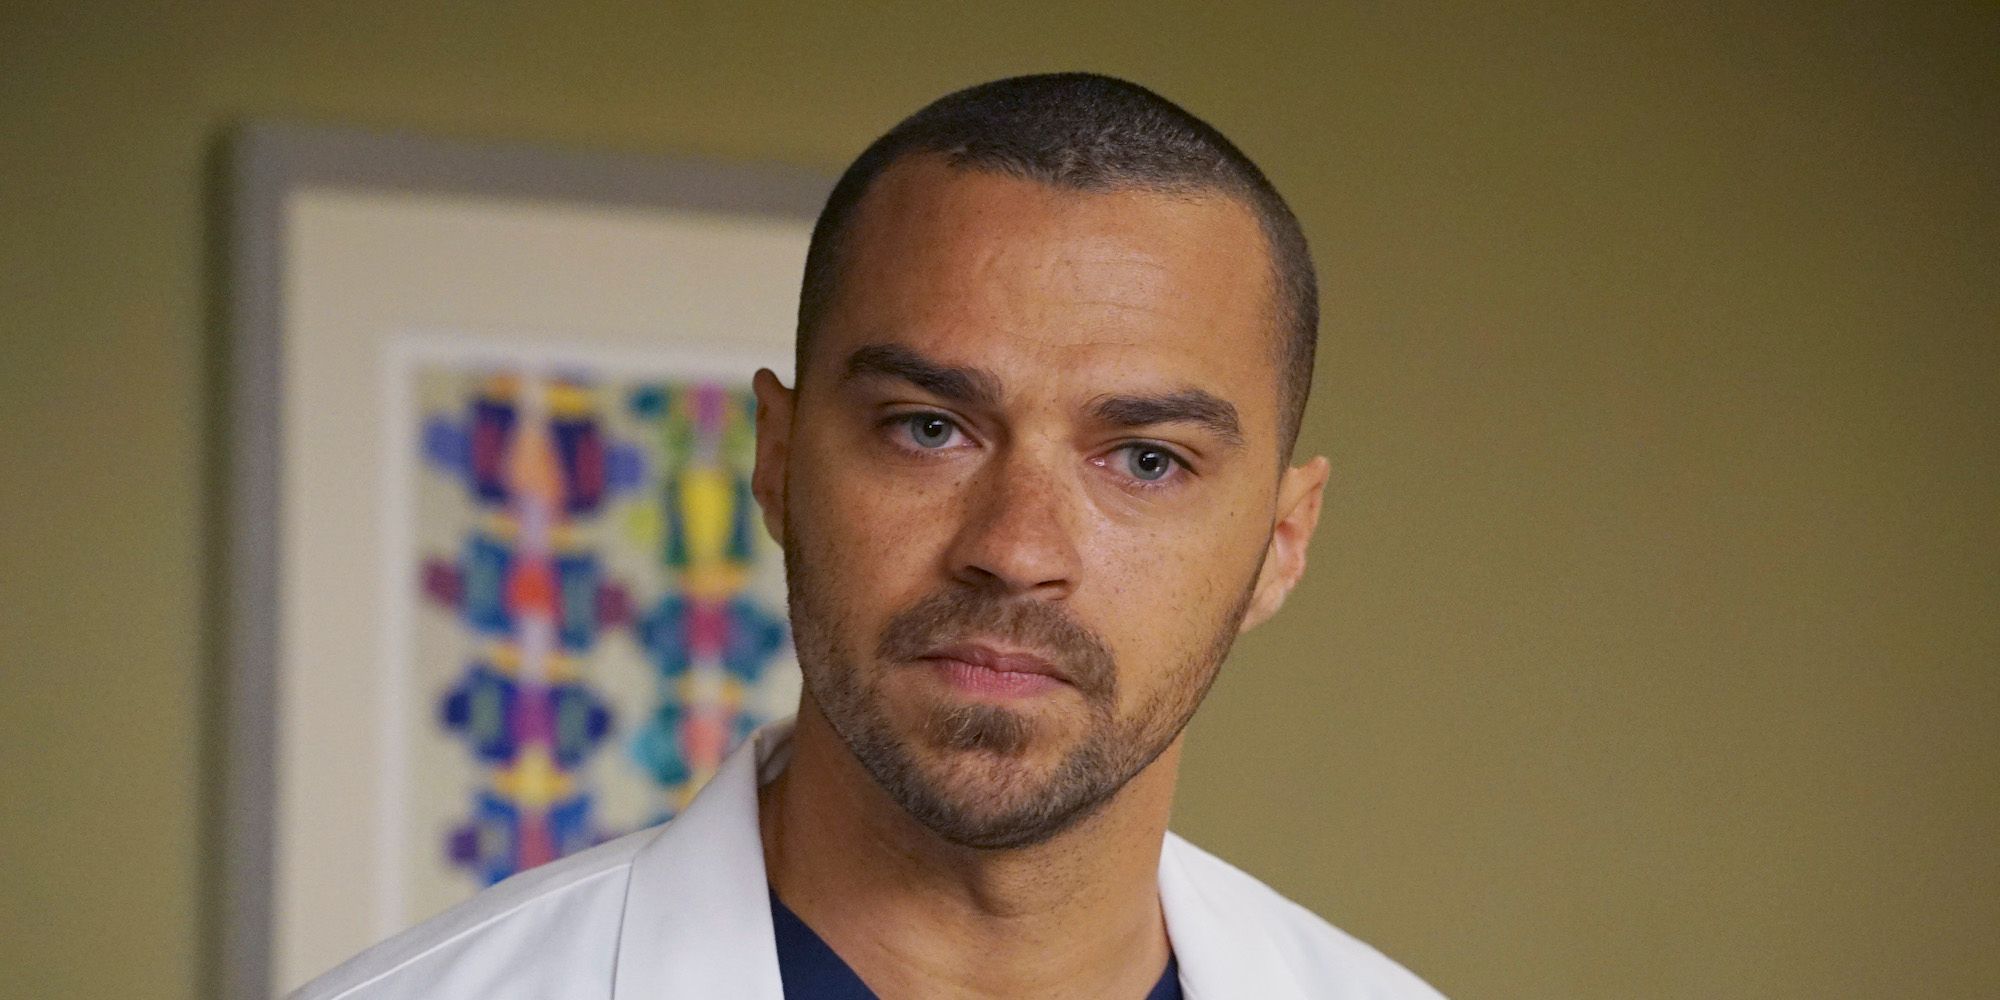 Greys Anatomy Most Inspirational Characters Ranked